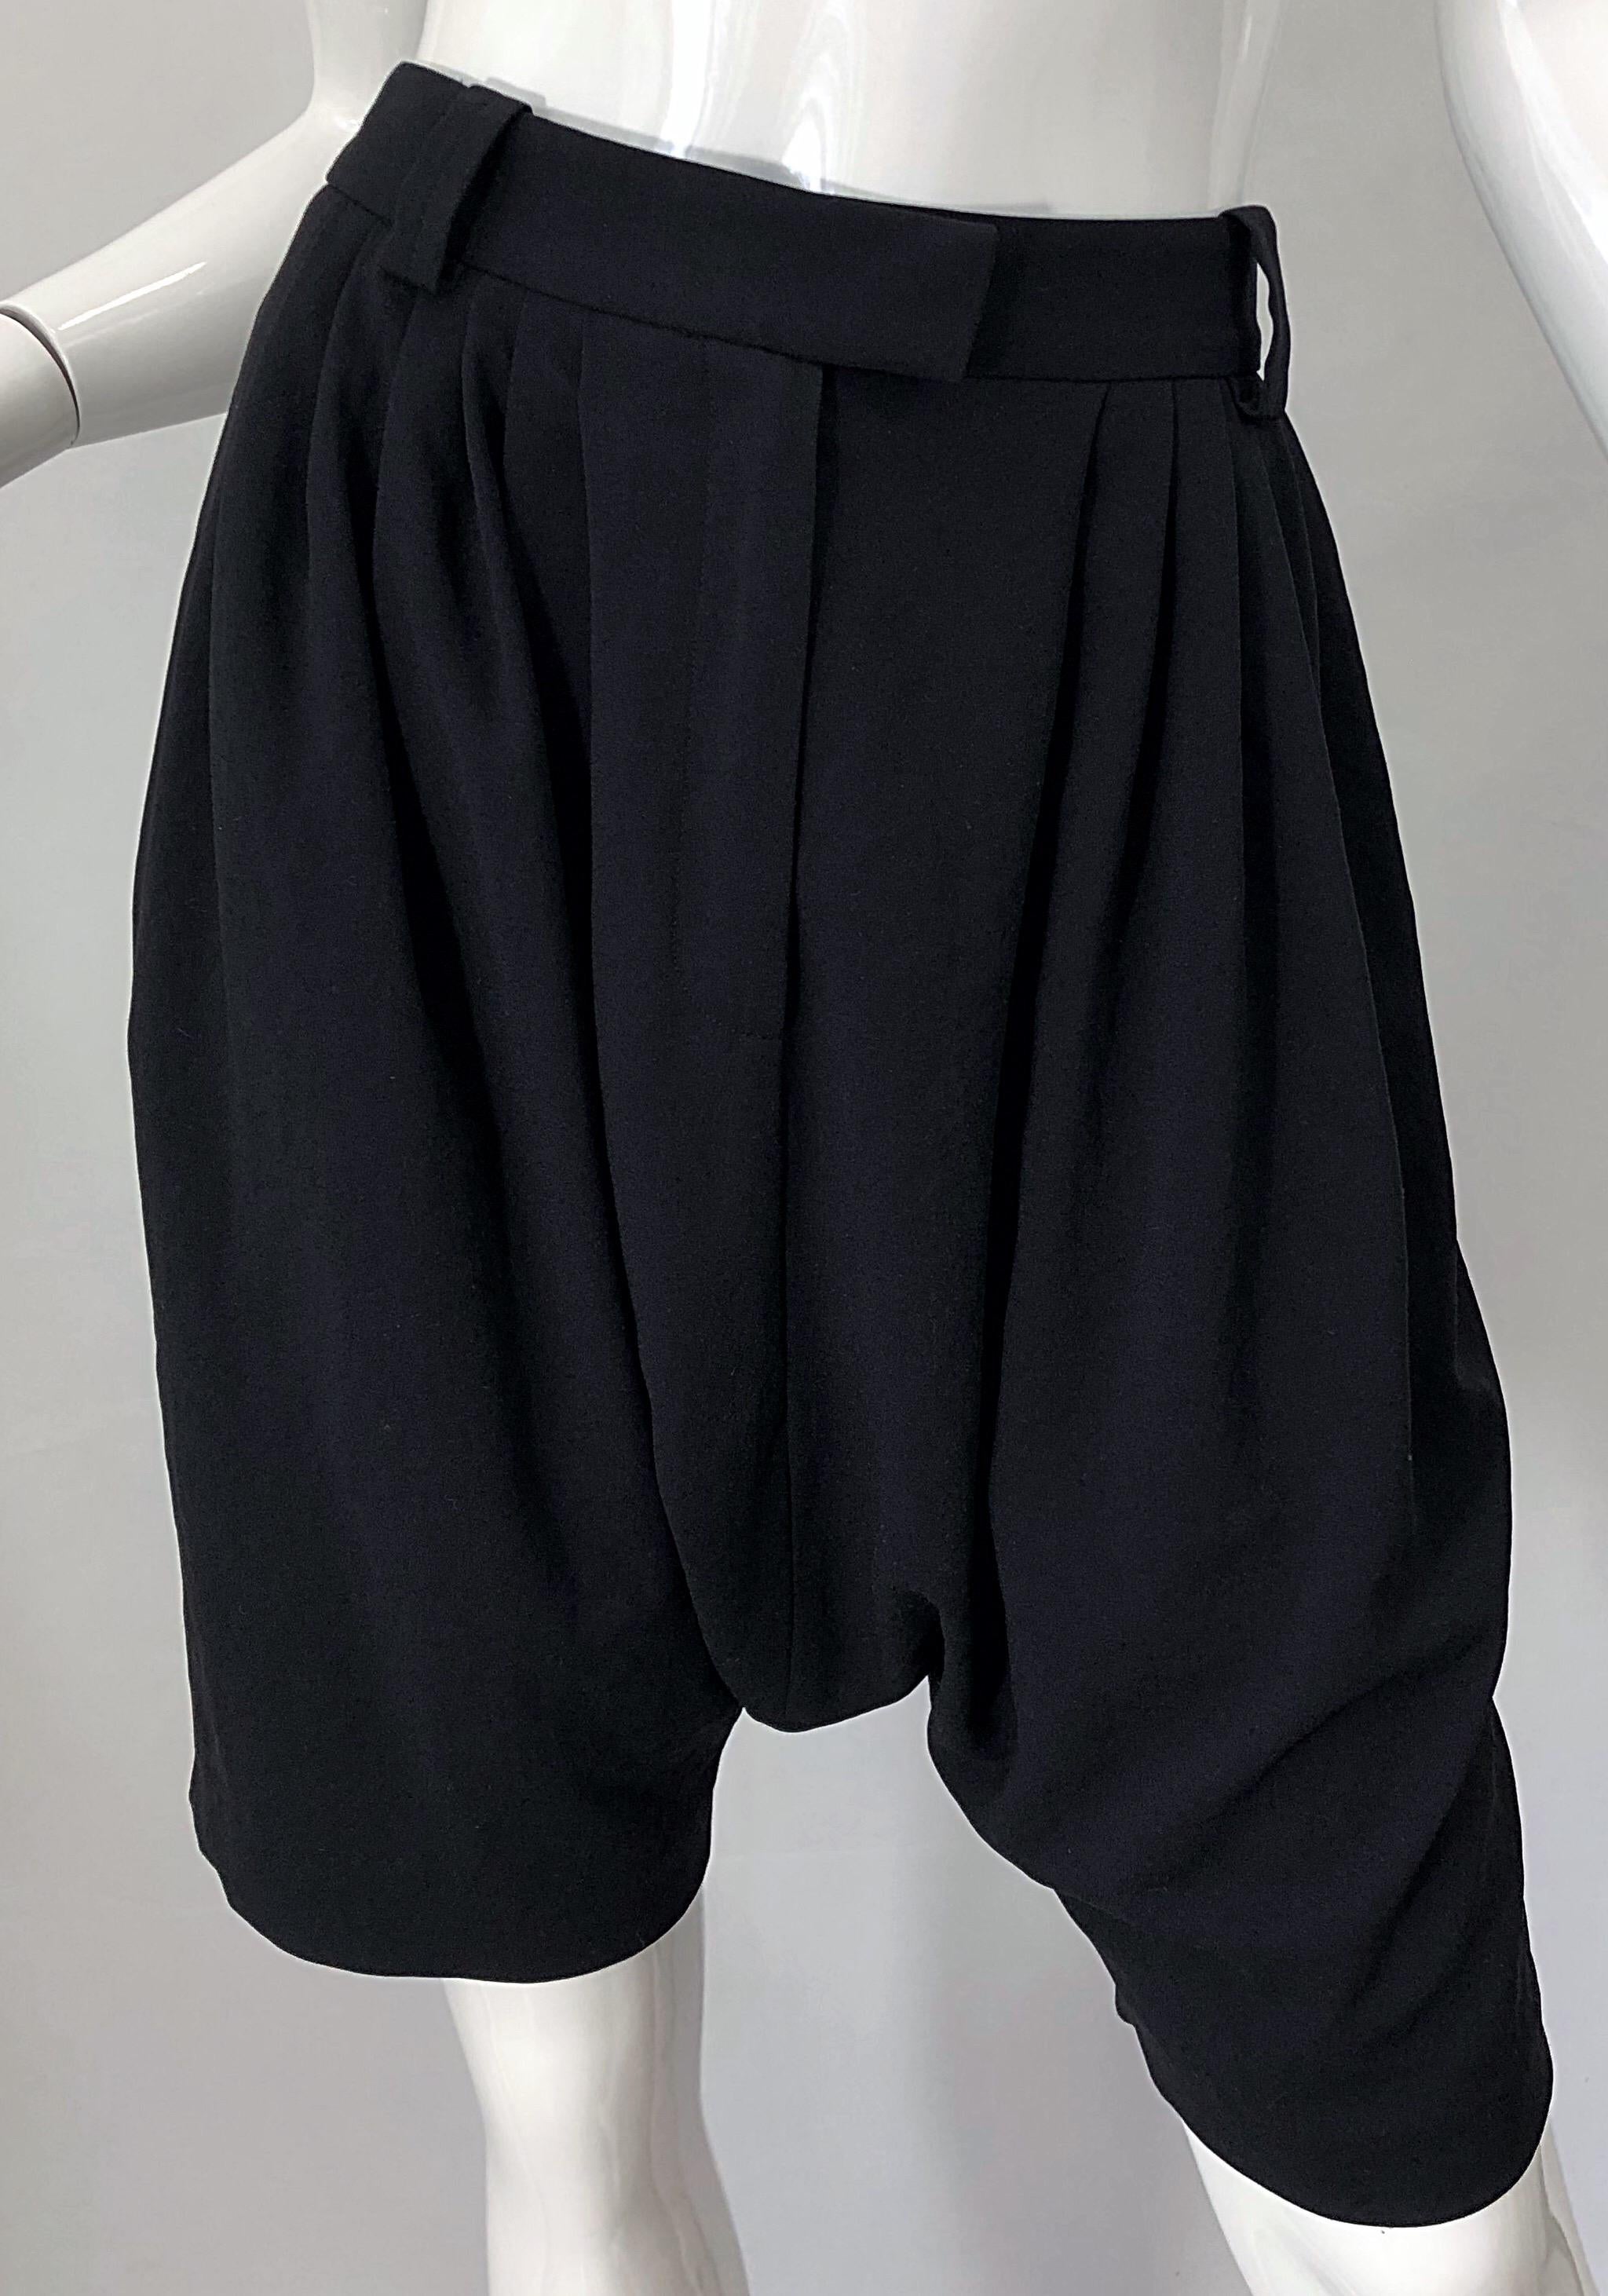 NWT Givenchy by Clare Waight Keller Size 40 / 8 Black Drop Crotch / Waist Shorts In New Condition For Sale In San Diego, CA